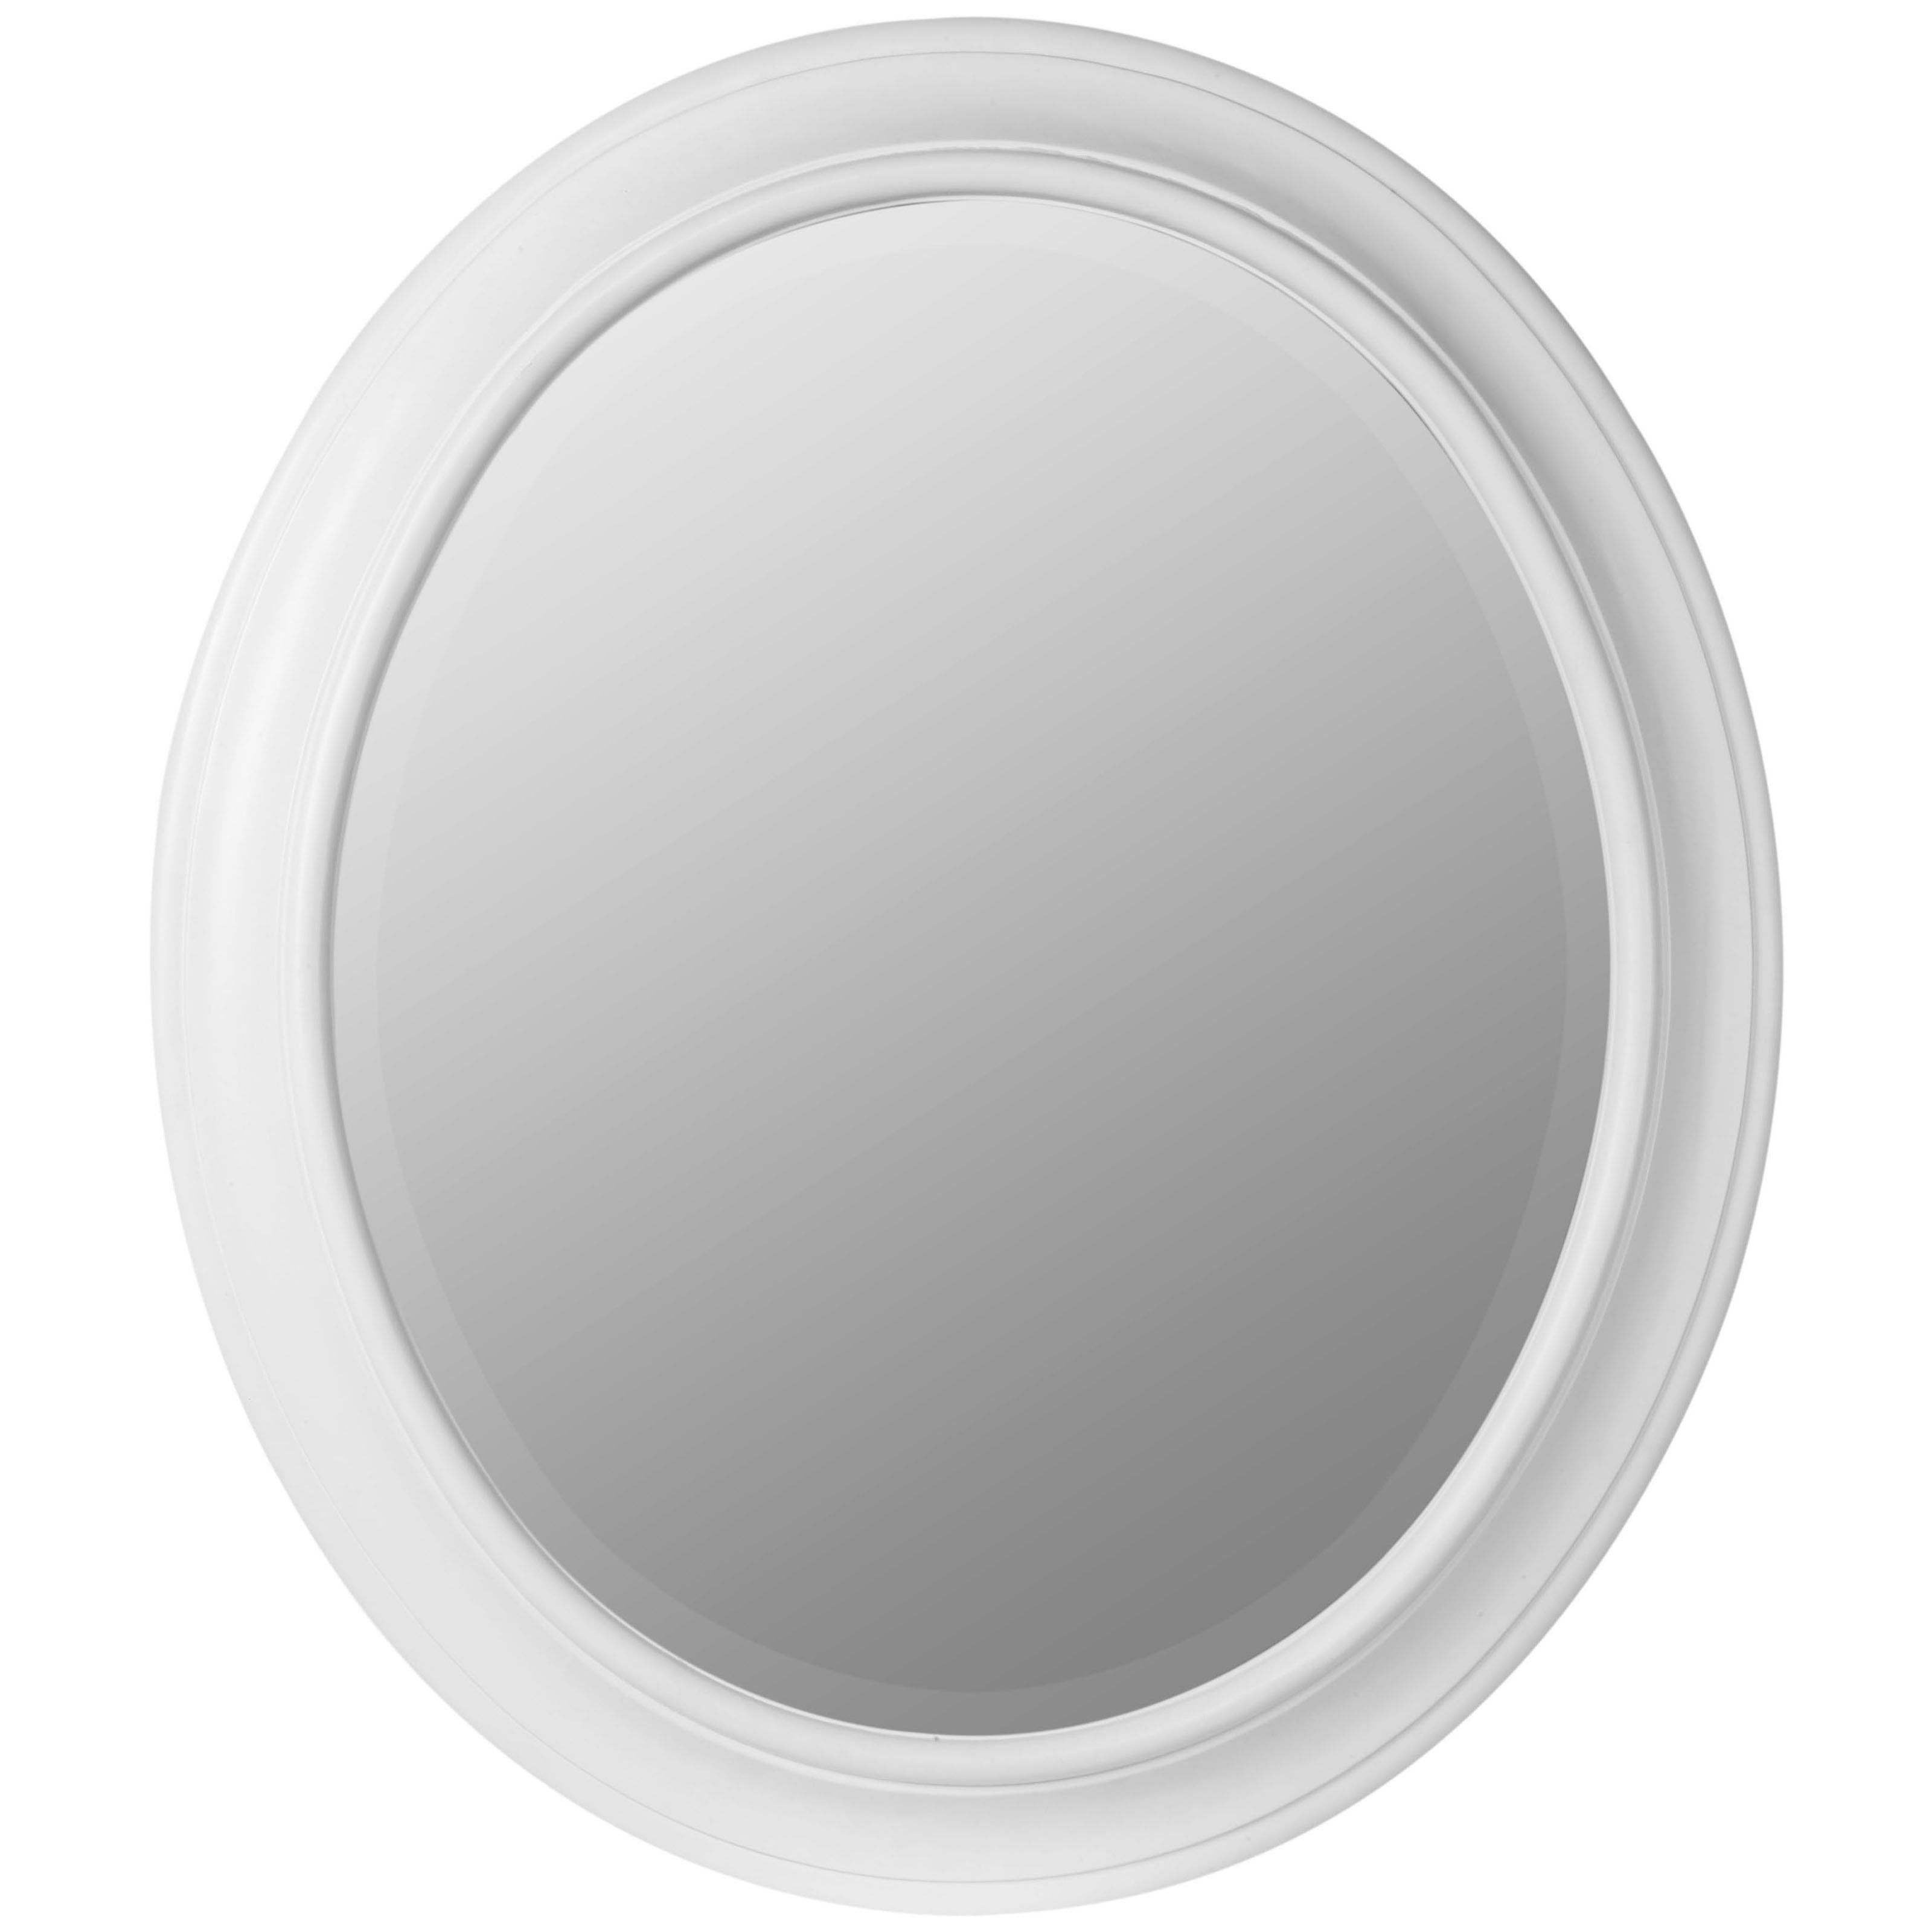 Belham Living Queen Anne Oval Wall Mirror Glossy White Mirrors Throughout Oval White Mirror (View 14 of 15)